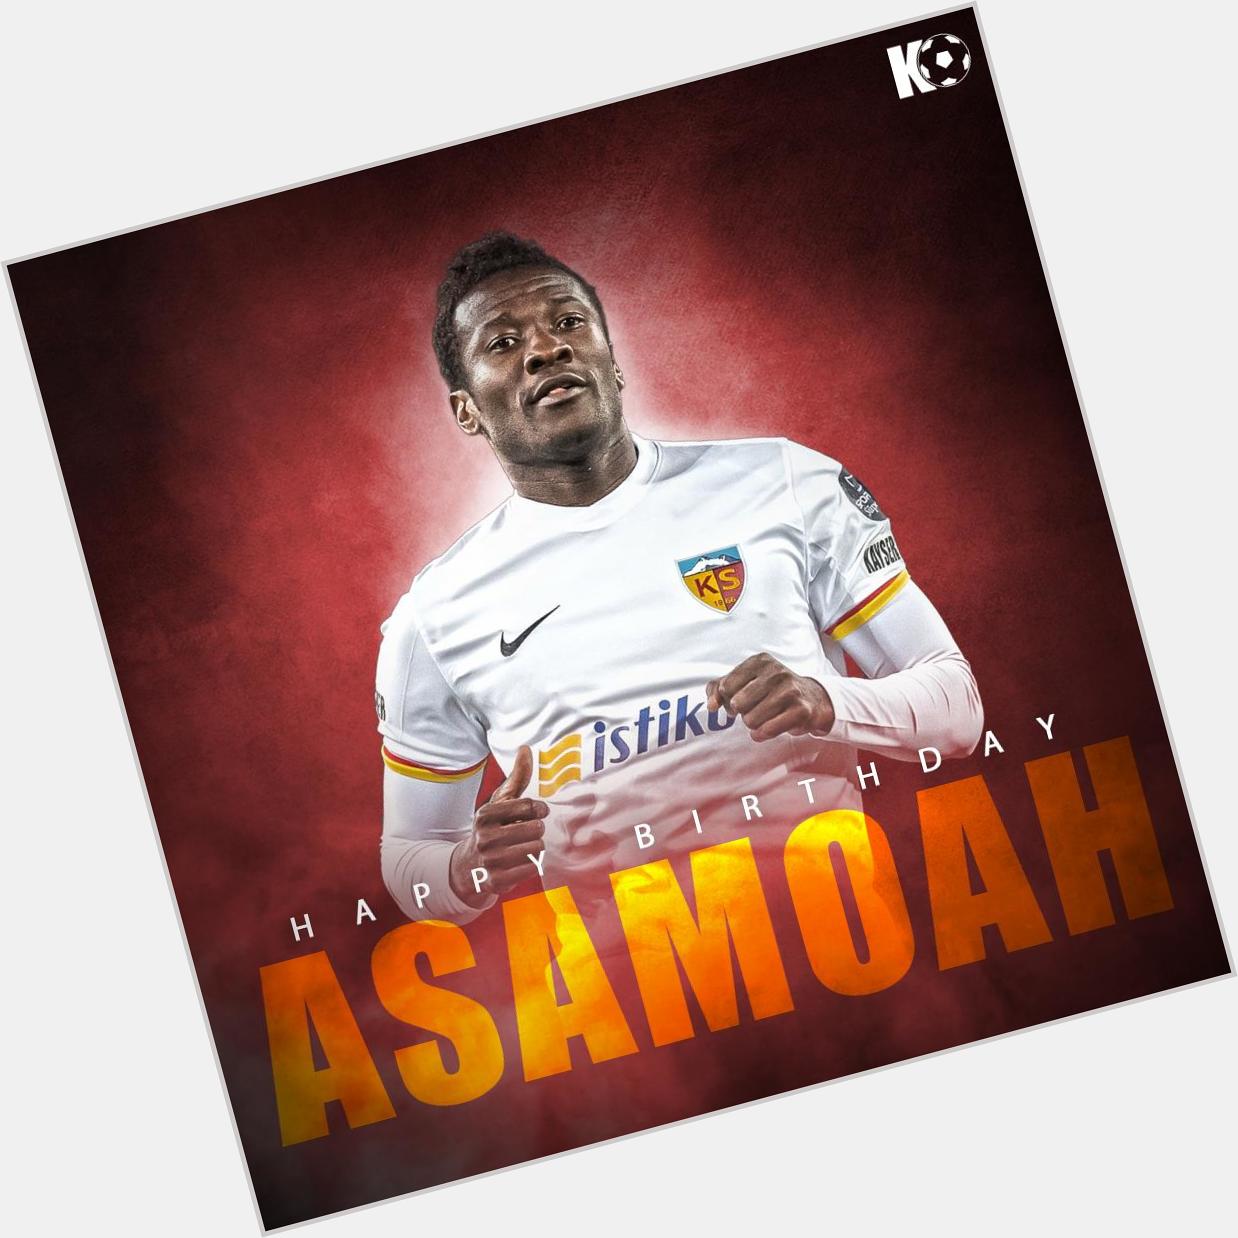 The Ghanaian legend turns 33 today! Join in wishing Asamoah Gyan a Happy Birthday! 